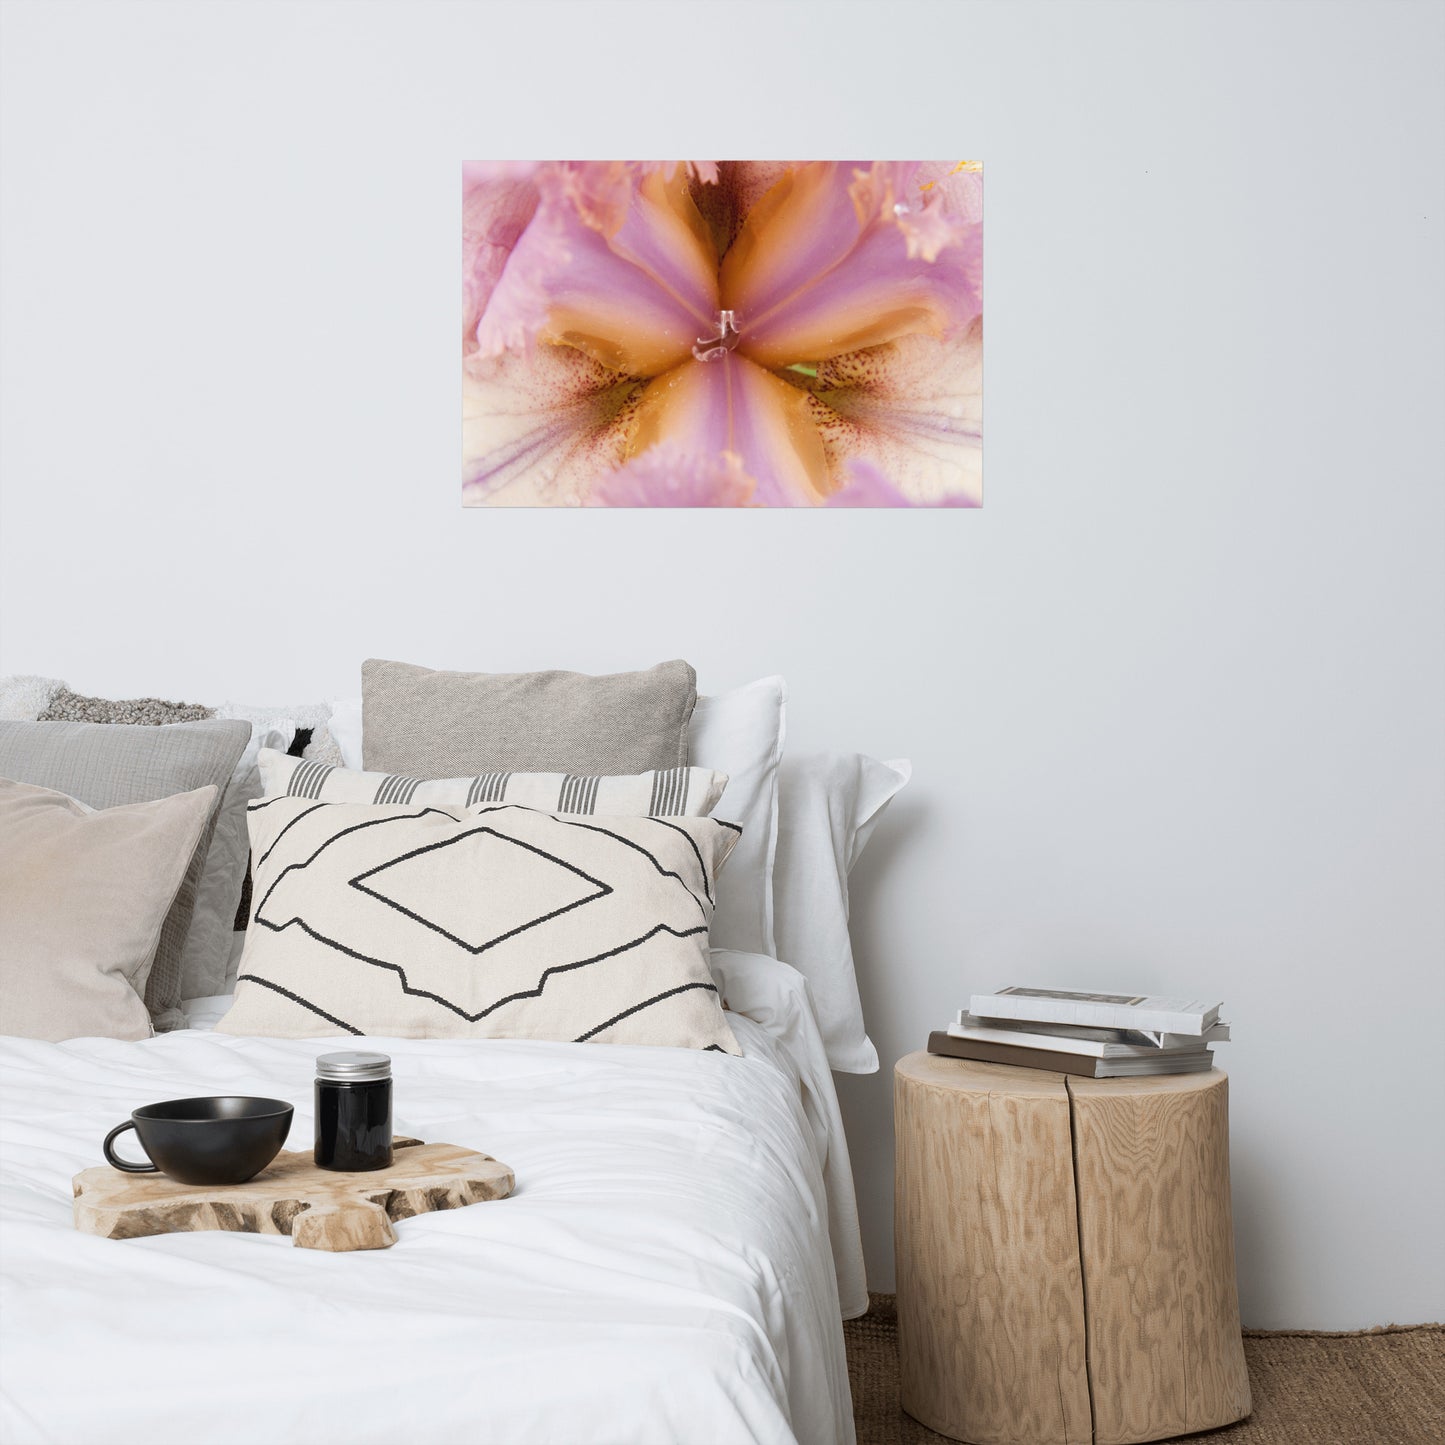 Symmetry of Nature Floral Nature Photo Loose Unframed Wall Art Prints